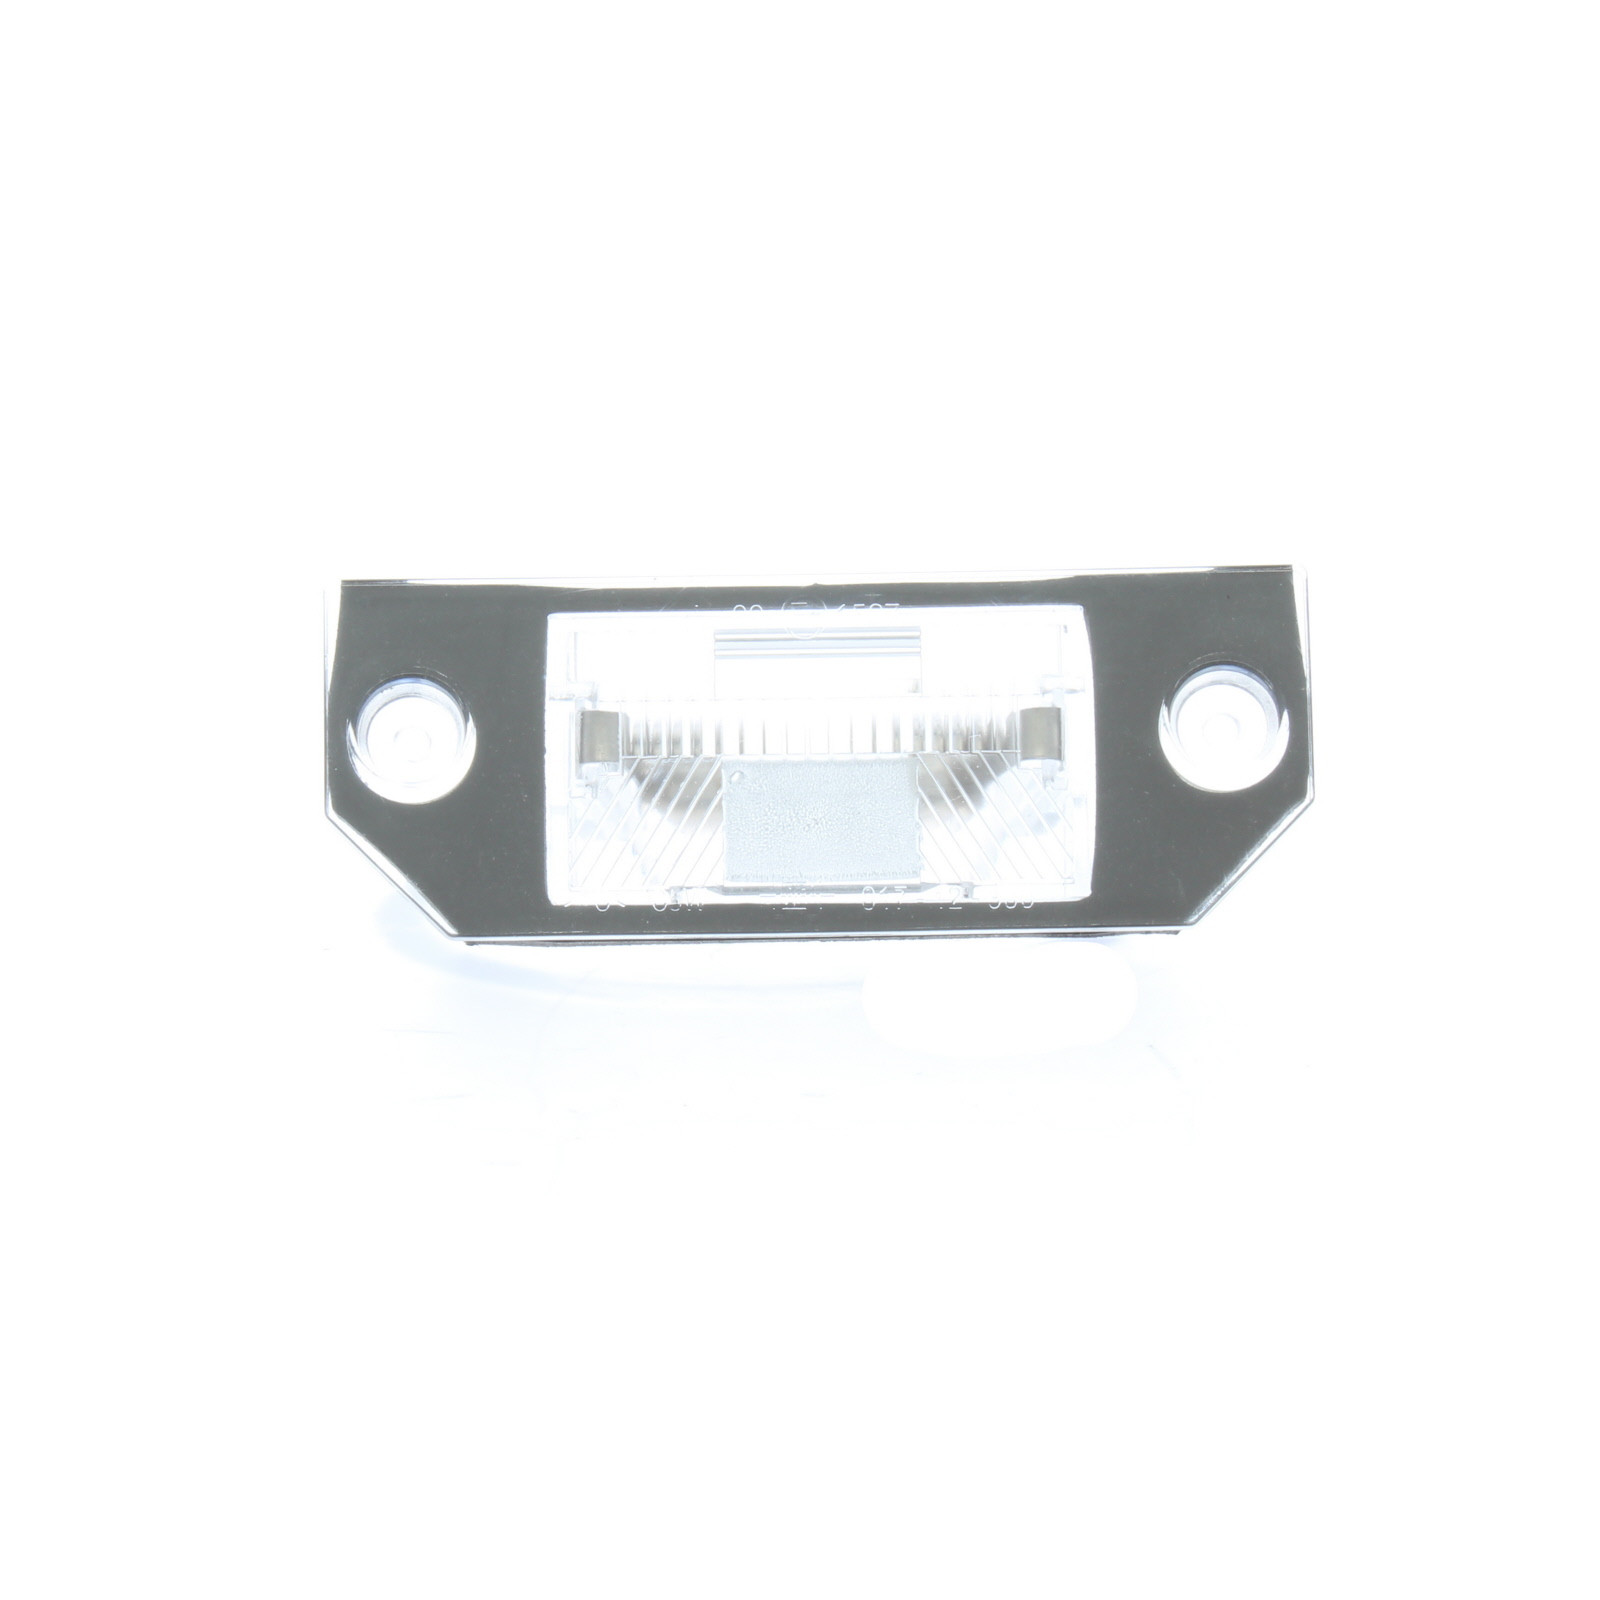 Rear Number Plate Light for Ford C-MAX